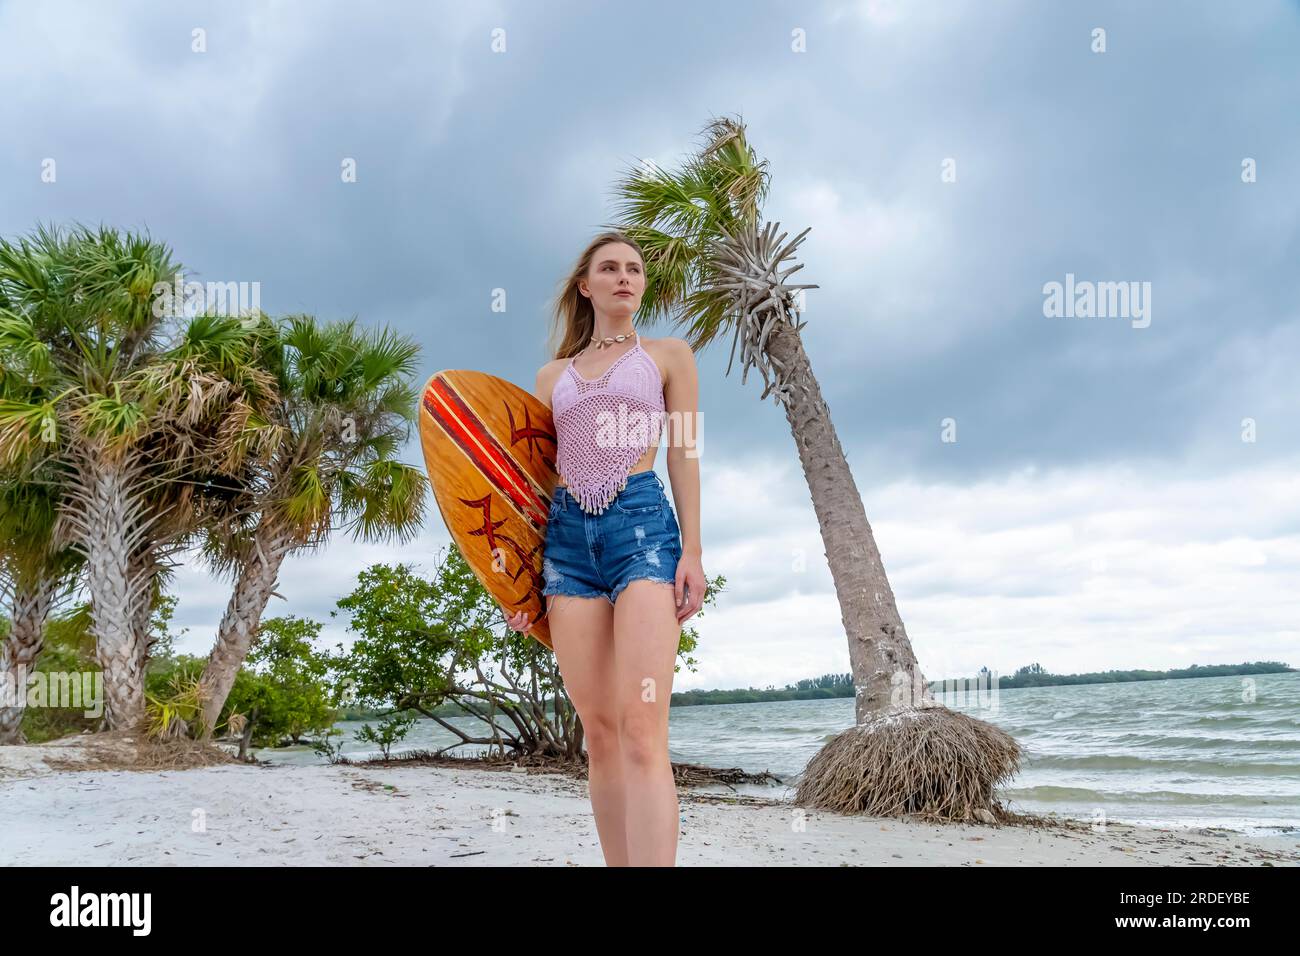 A beautiful blonde model enjoys a summers day while preparing to surf on the ocean with her boogie board Stock Photo